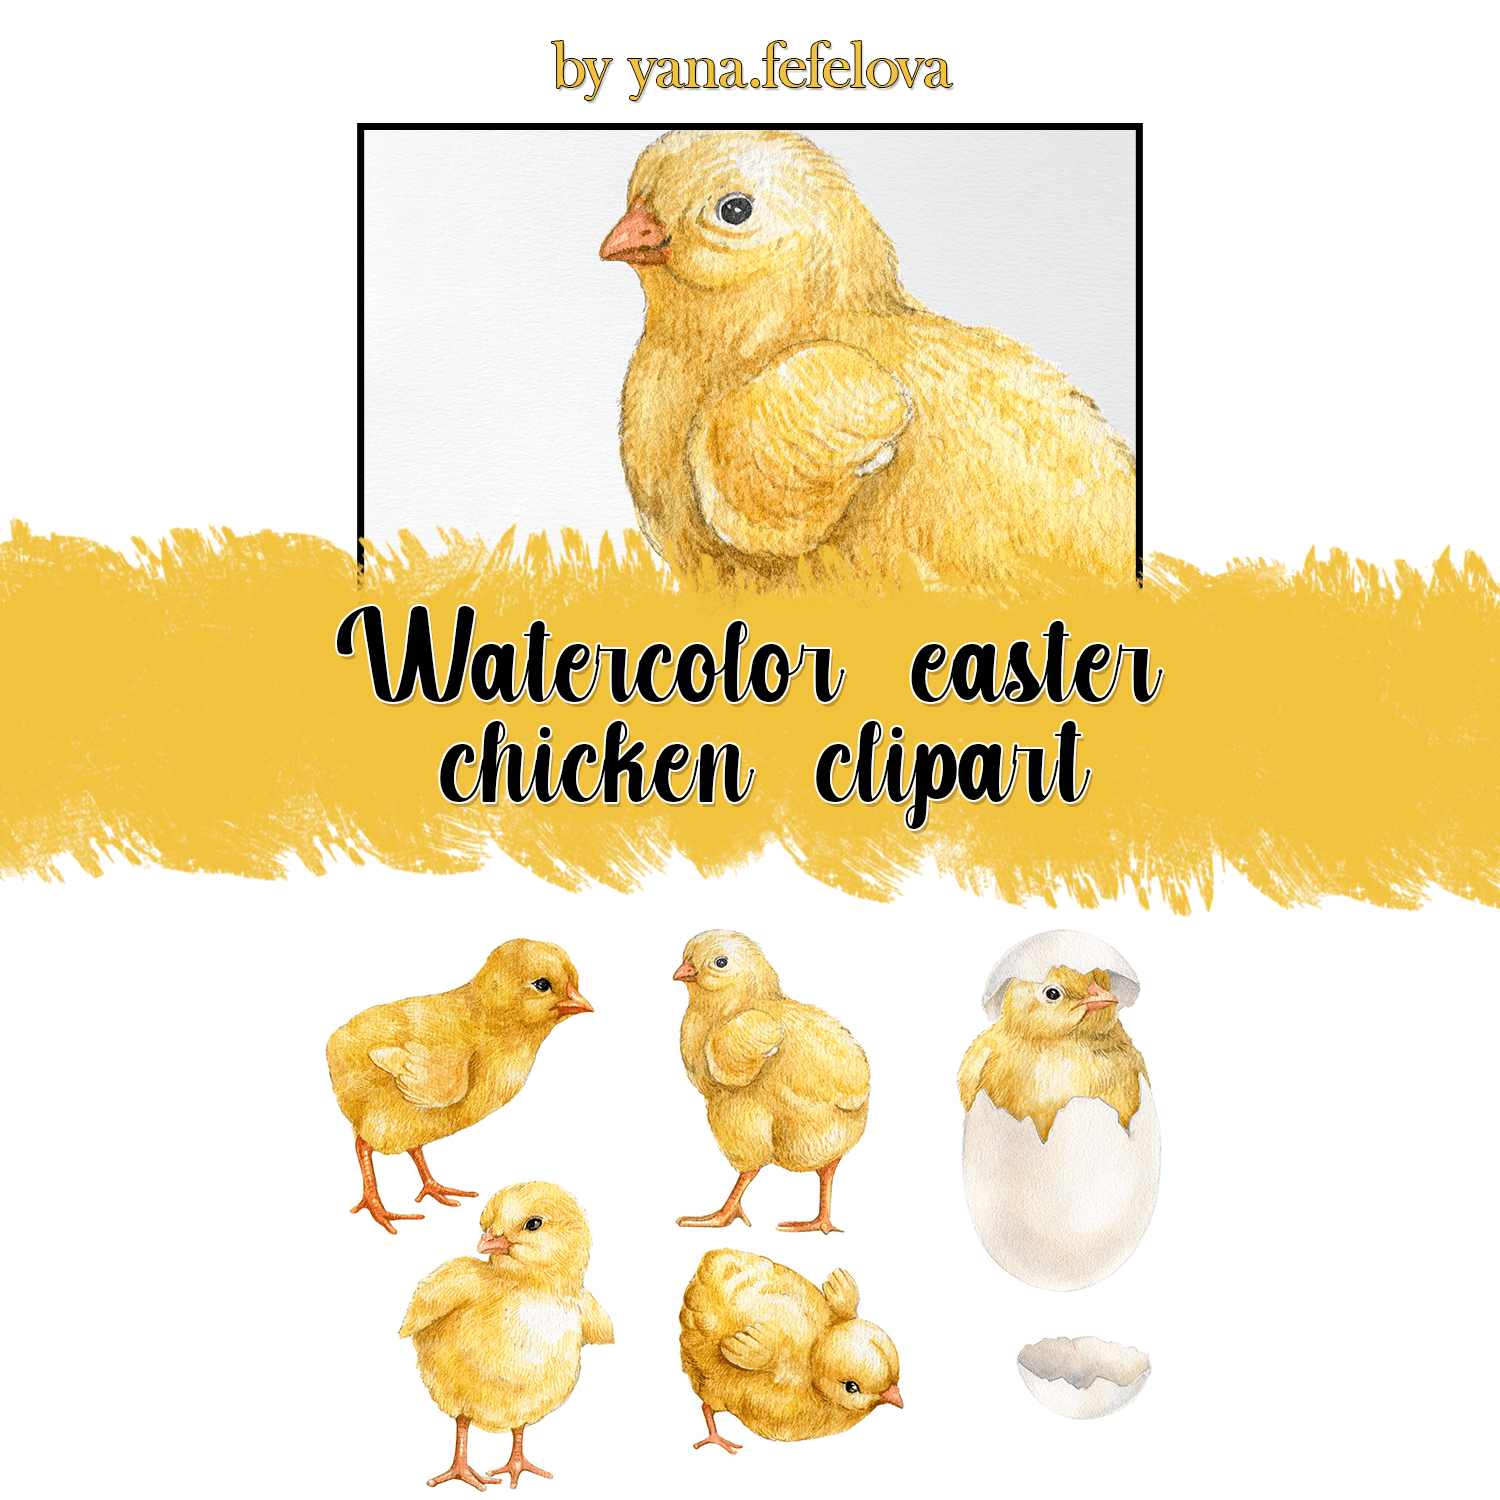 Watercolor easter chicken clipart cover.